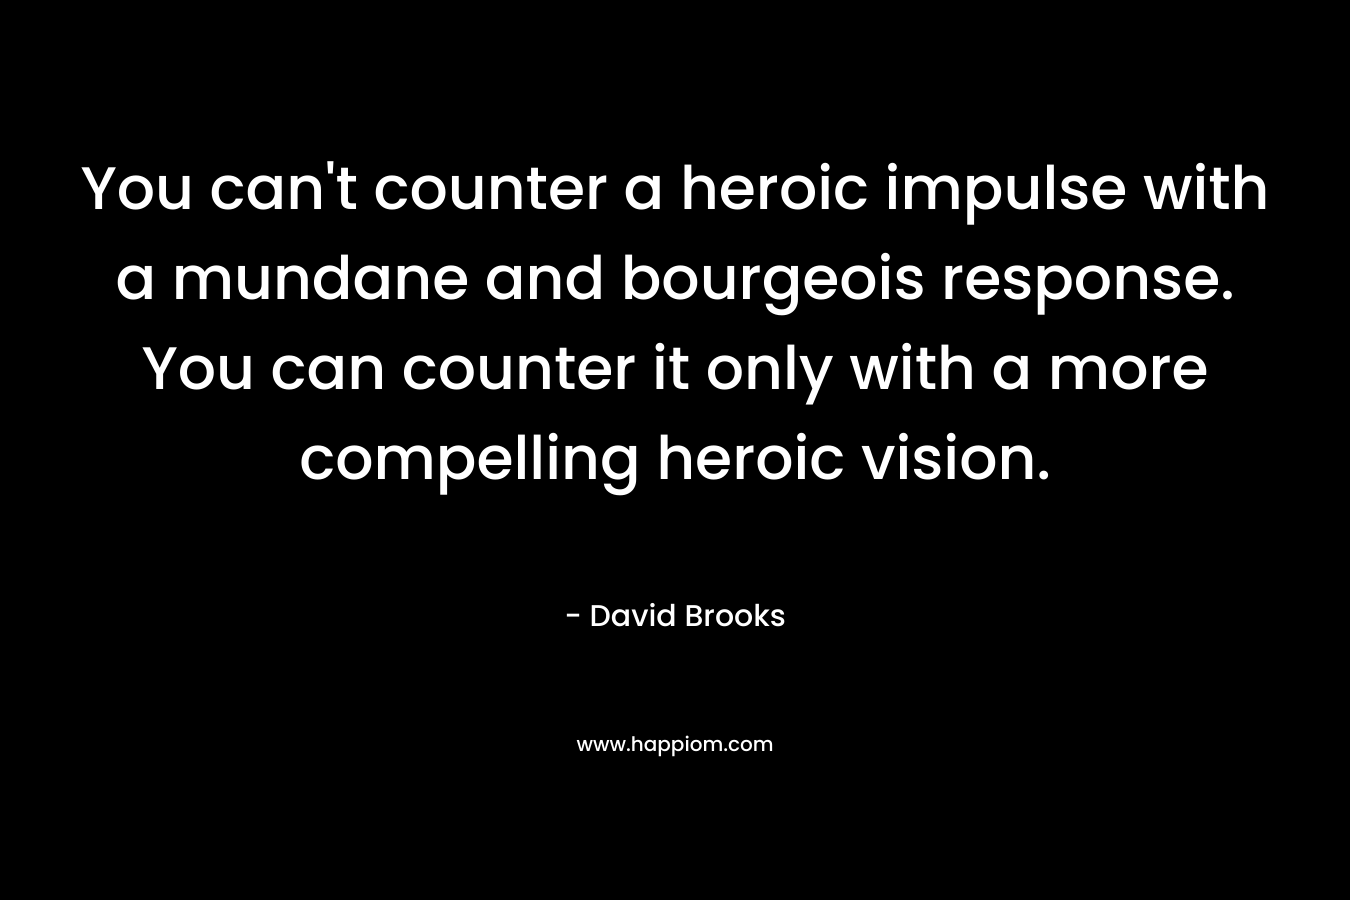 You can’t counter a heroic impulse with a mundane and bourgeois response. You can counter it only with a more compelling heroic vision. – David Brooks